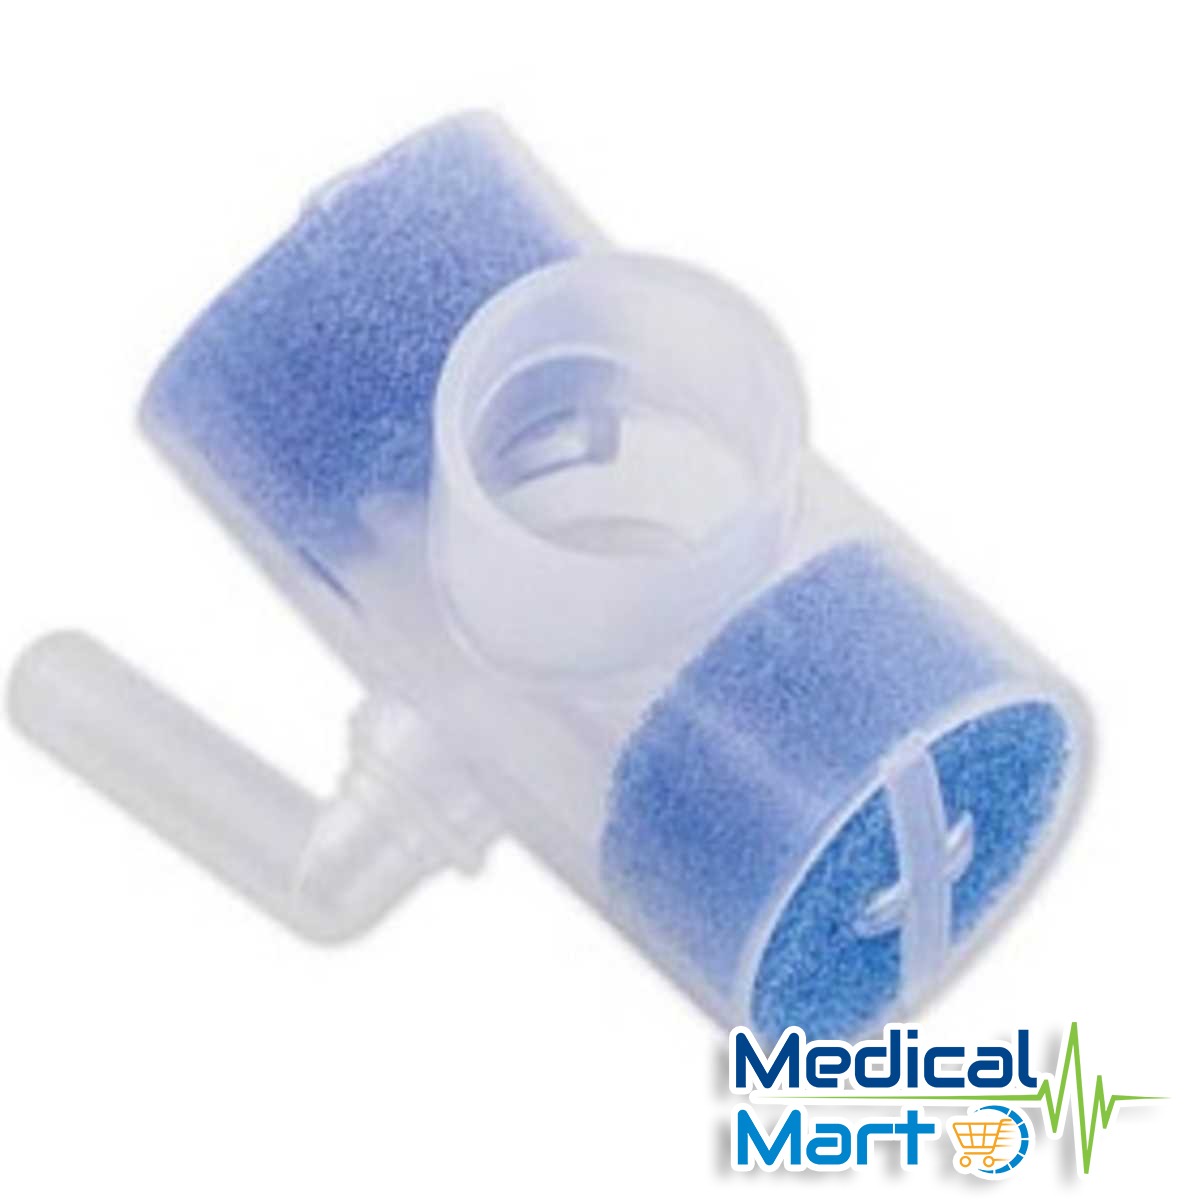 Flexicare Thermotrach Tracheostomy Hme With Vent And Swivel Oxygen Port